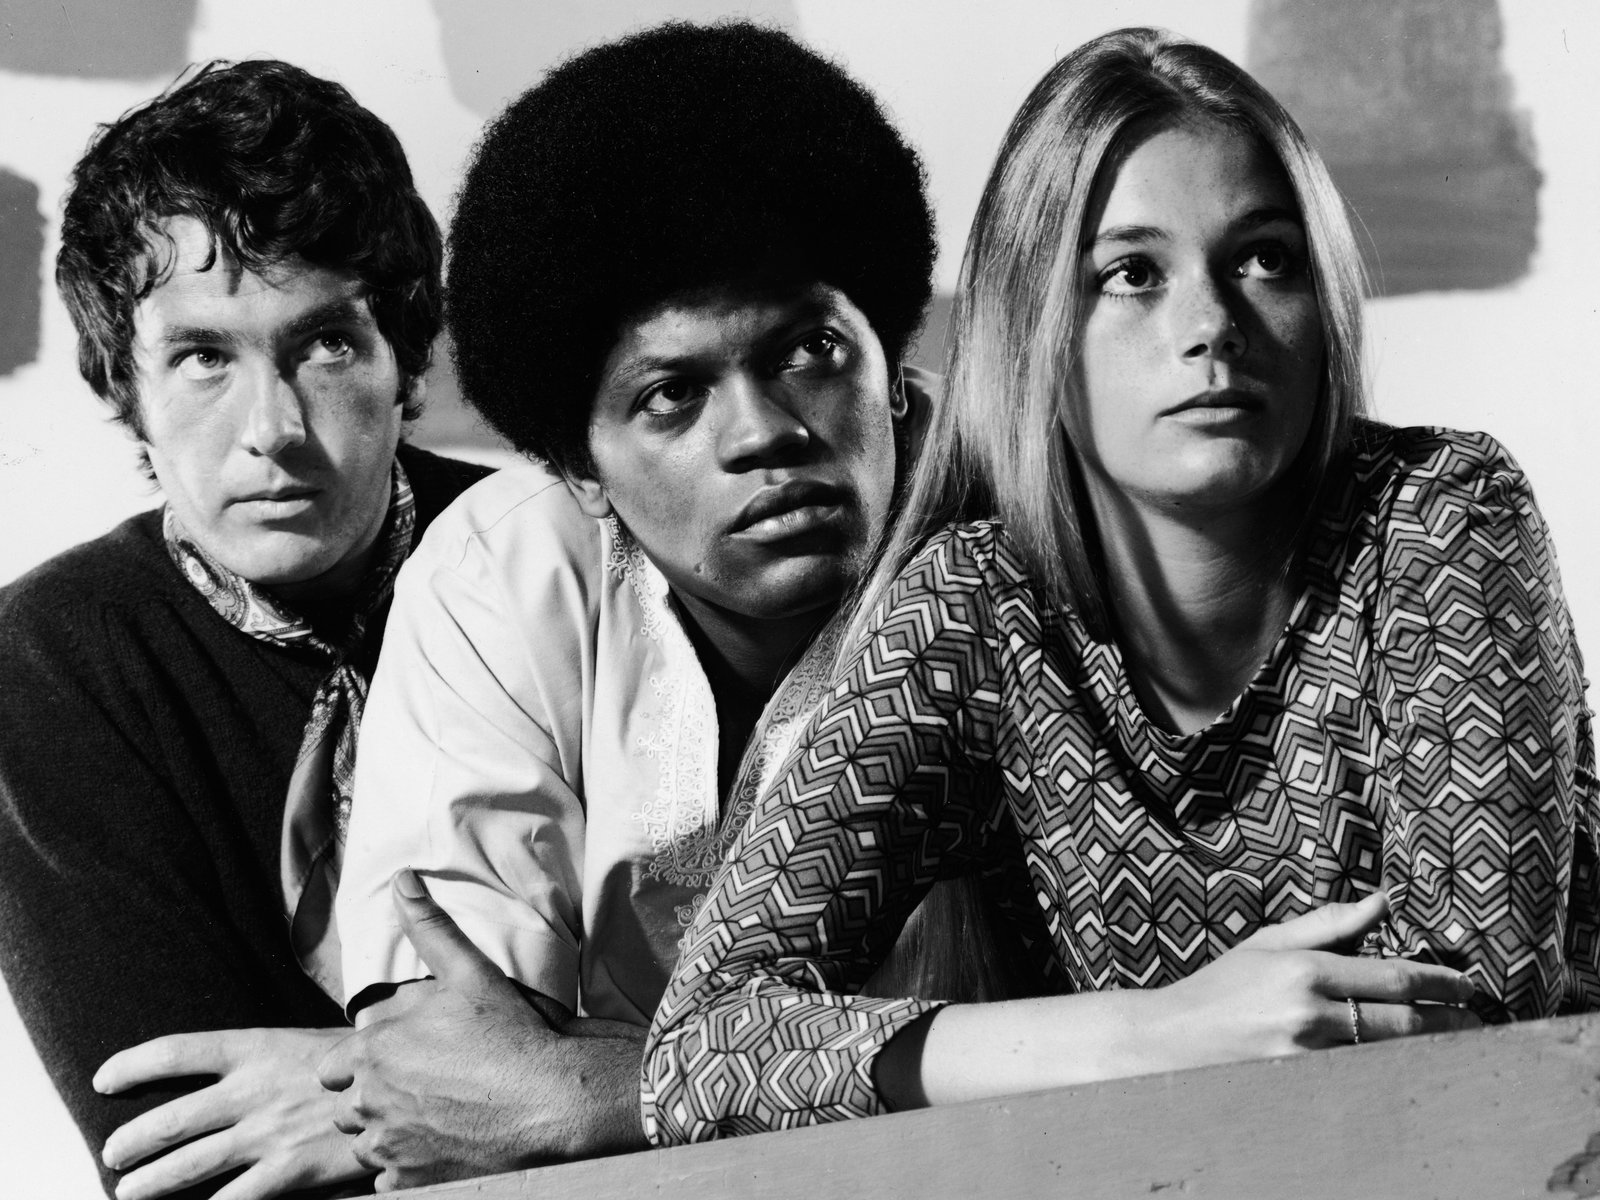 DECADES TV Network Will Air “The Mod Squad” Marathon in Memory of Peggy Lipton